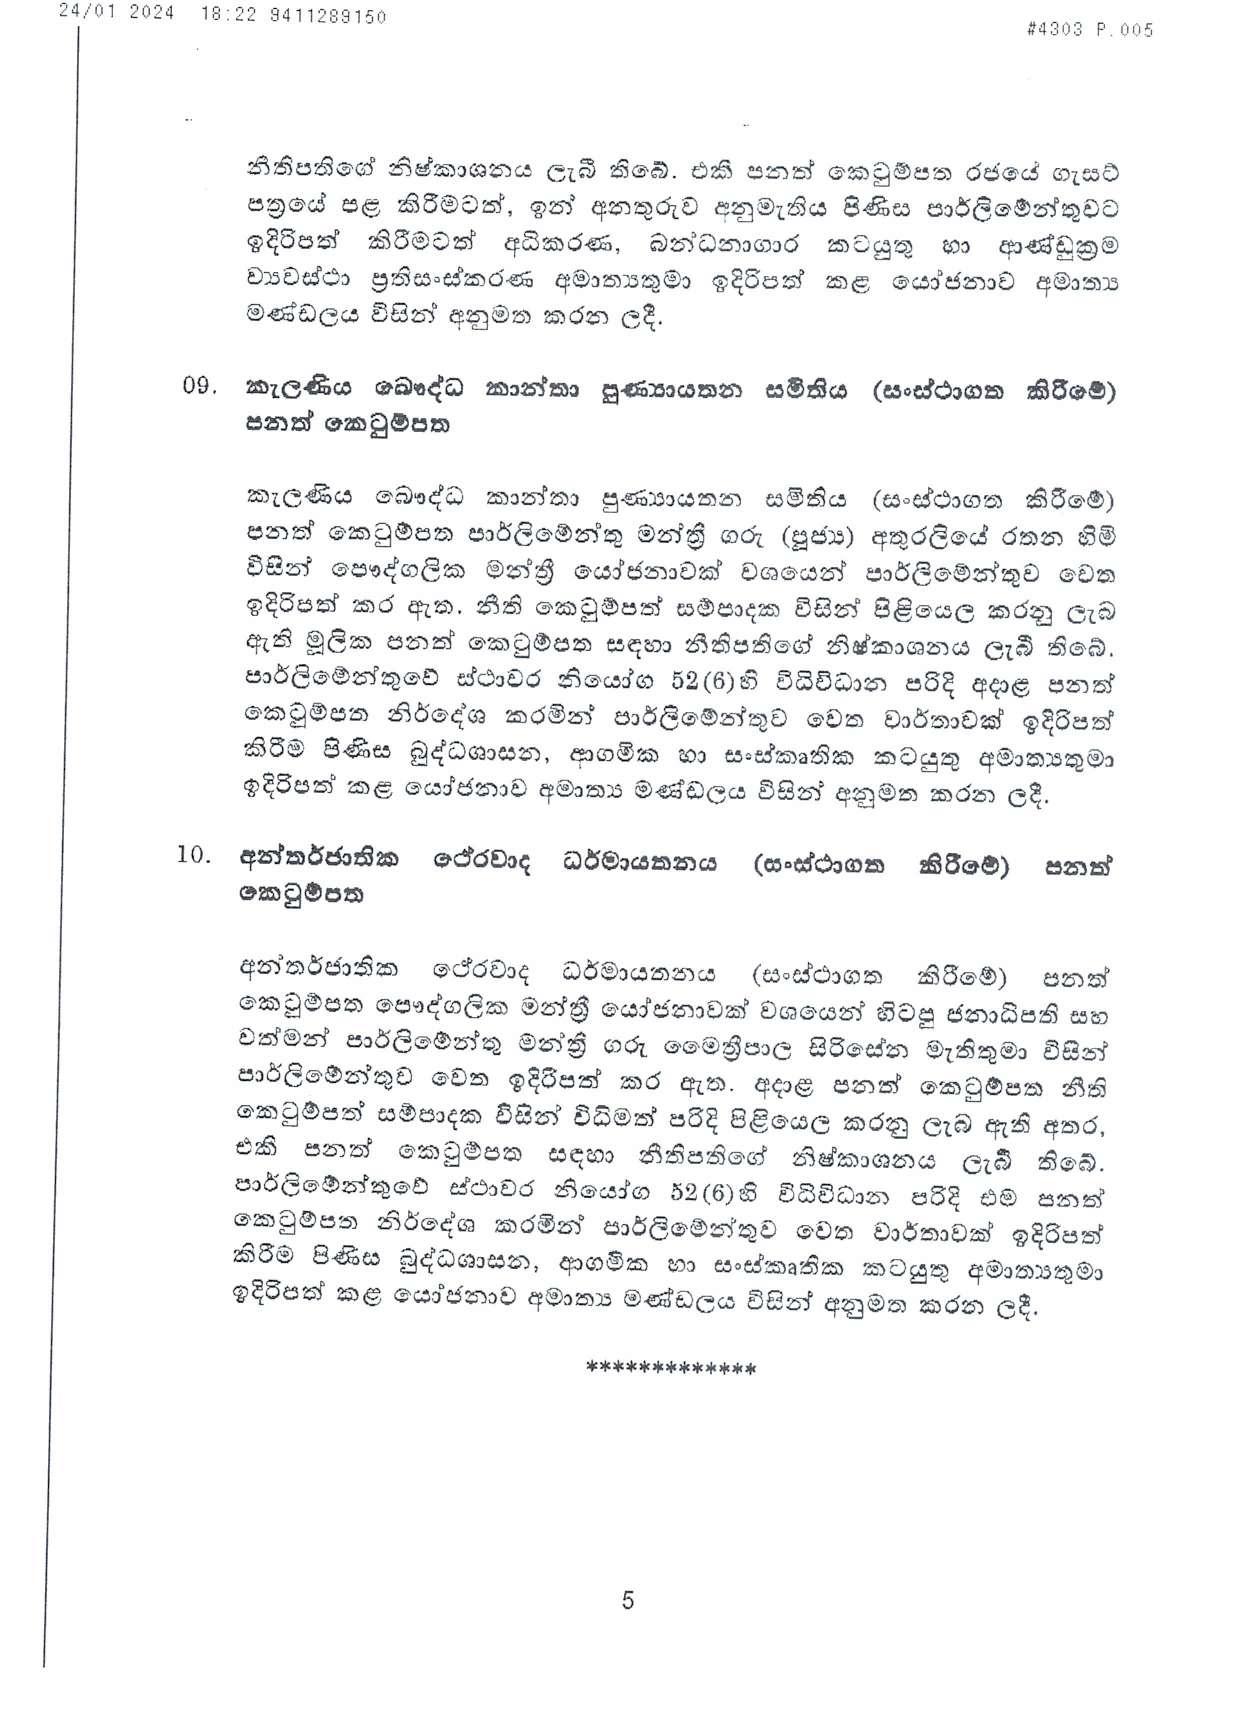 Cabinet Decisions on 24.01.2024 compressed page 005